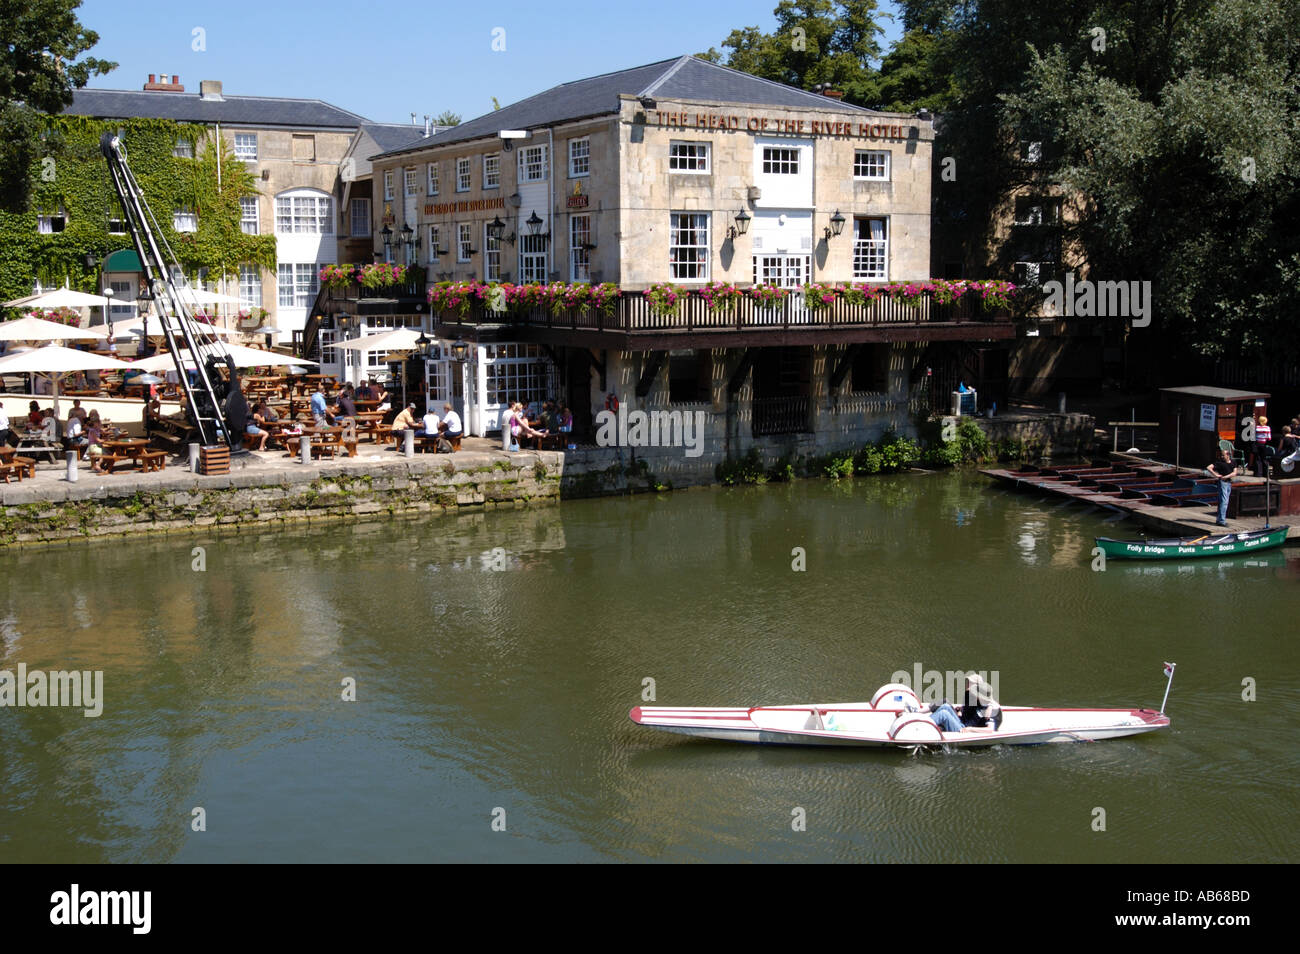 Head of the River pub Oxford England River Thames Isis Stock Photo